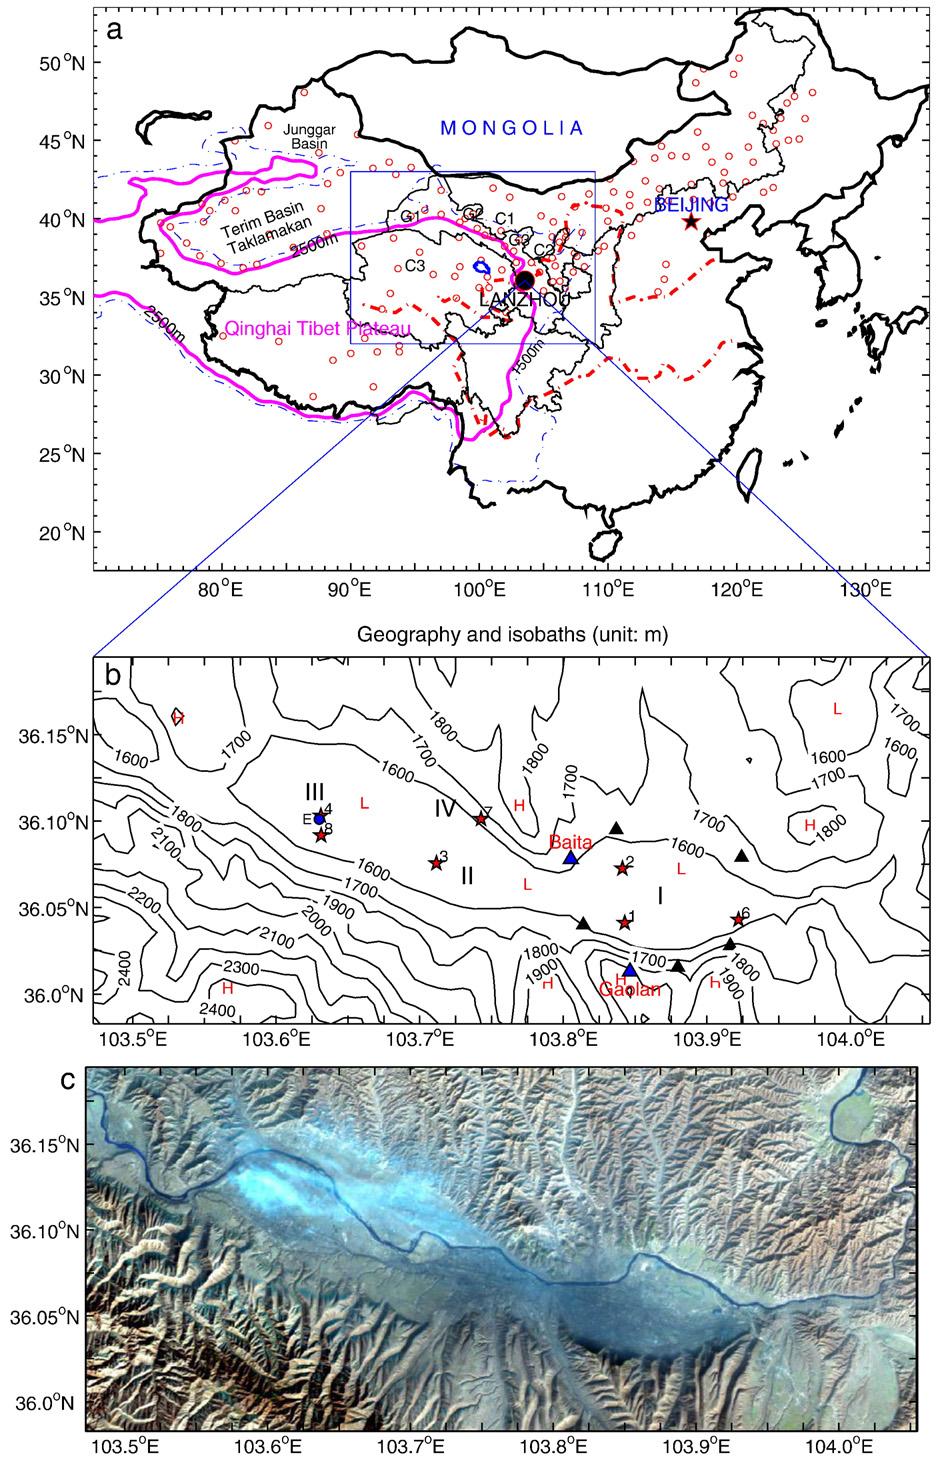 366 P.C. Chu et al. / Atmospheric Research 89 (2008) 365 373 Fig. 1. Lanzhou (a) geography, (b) topography, and (c) LANDSAT-TM imagery representing air pollution on January 3, 2001.